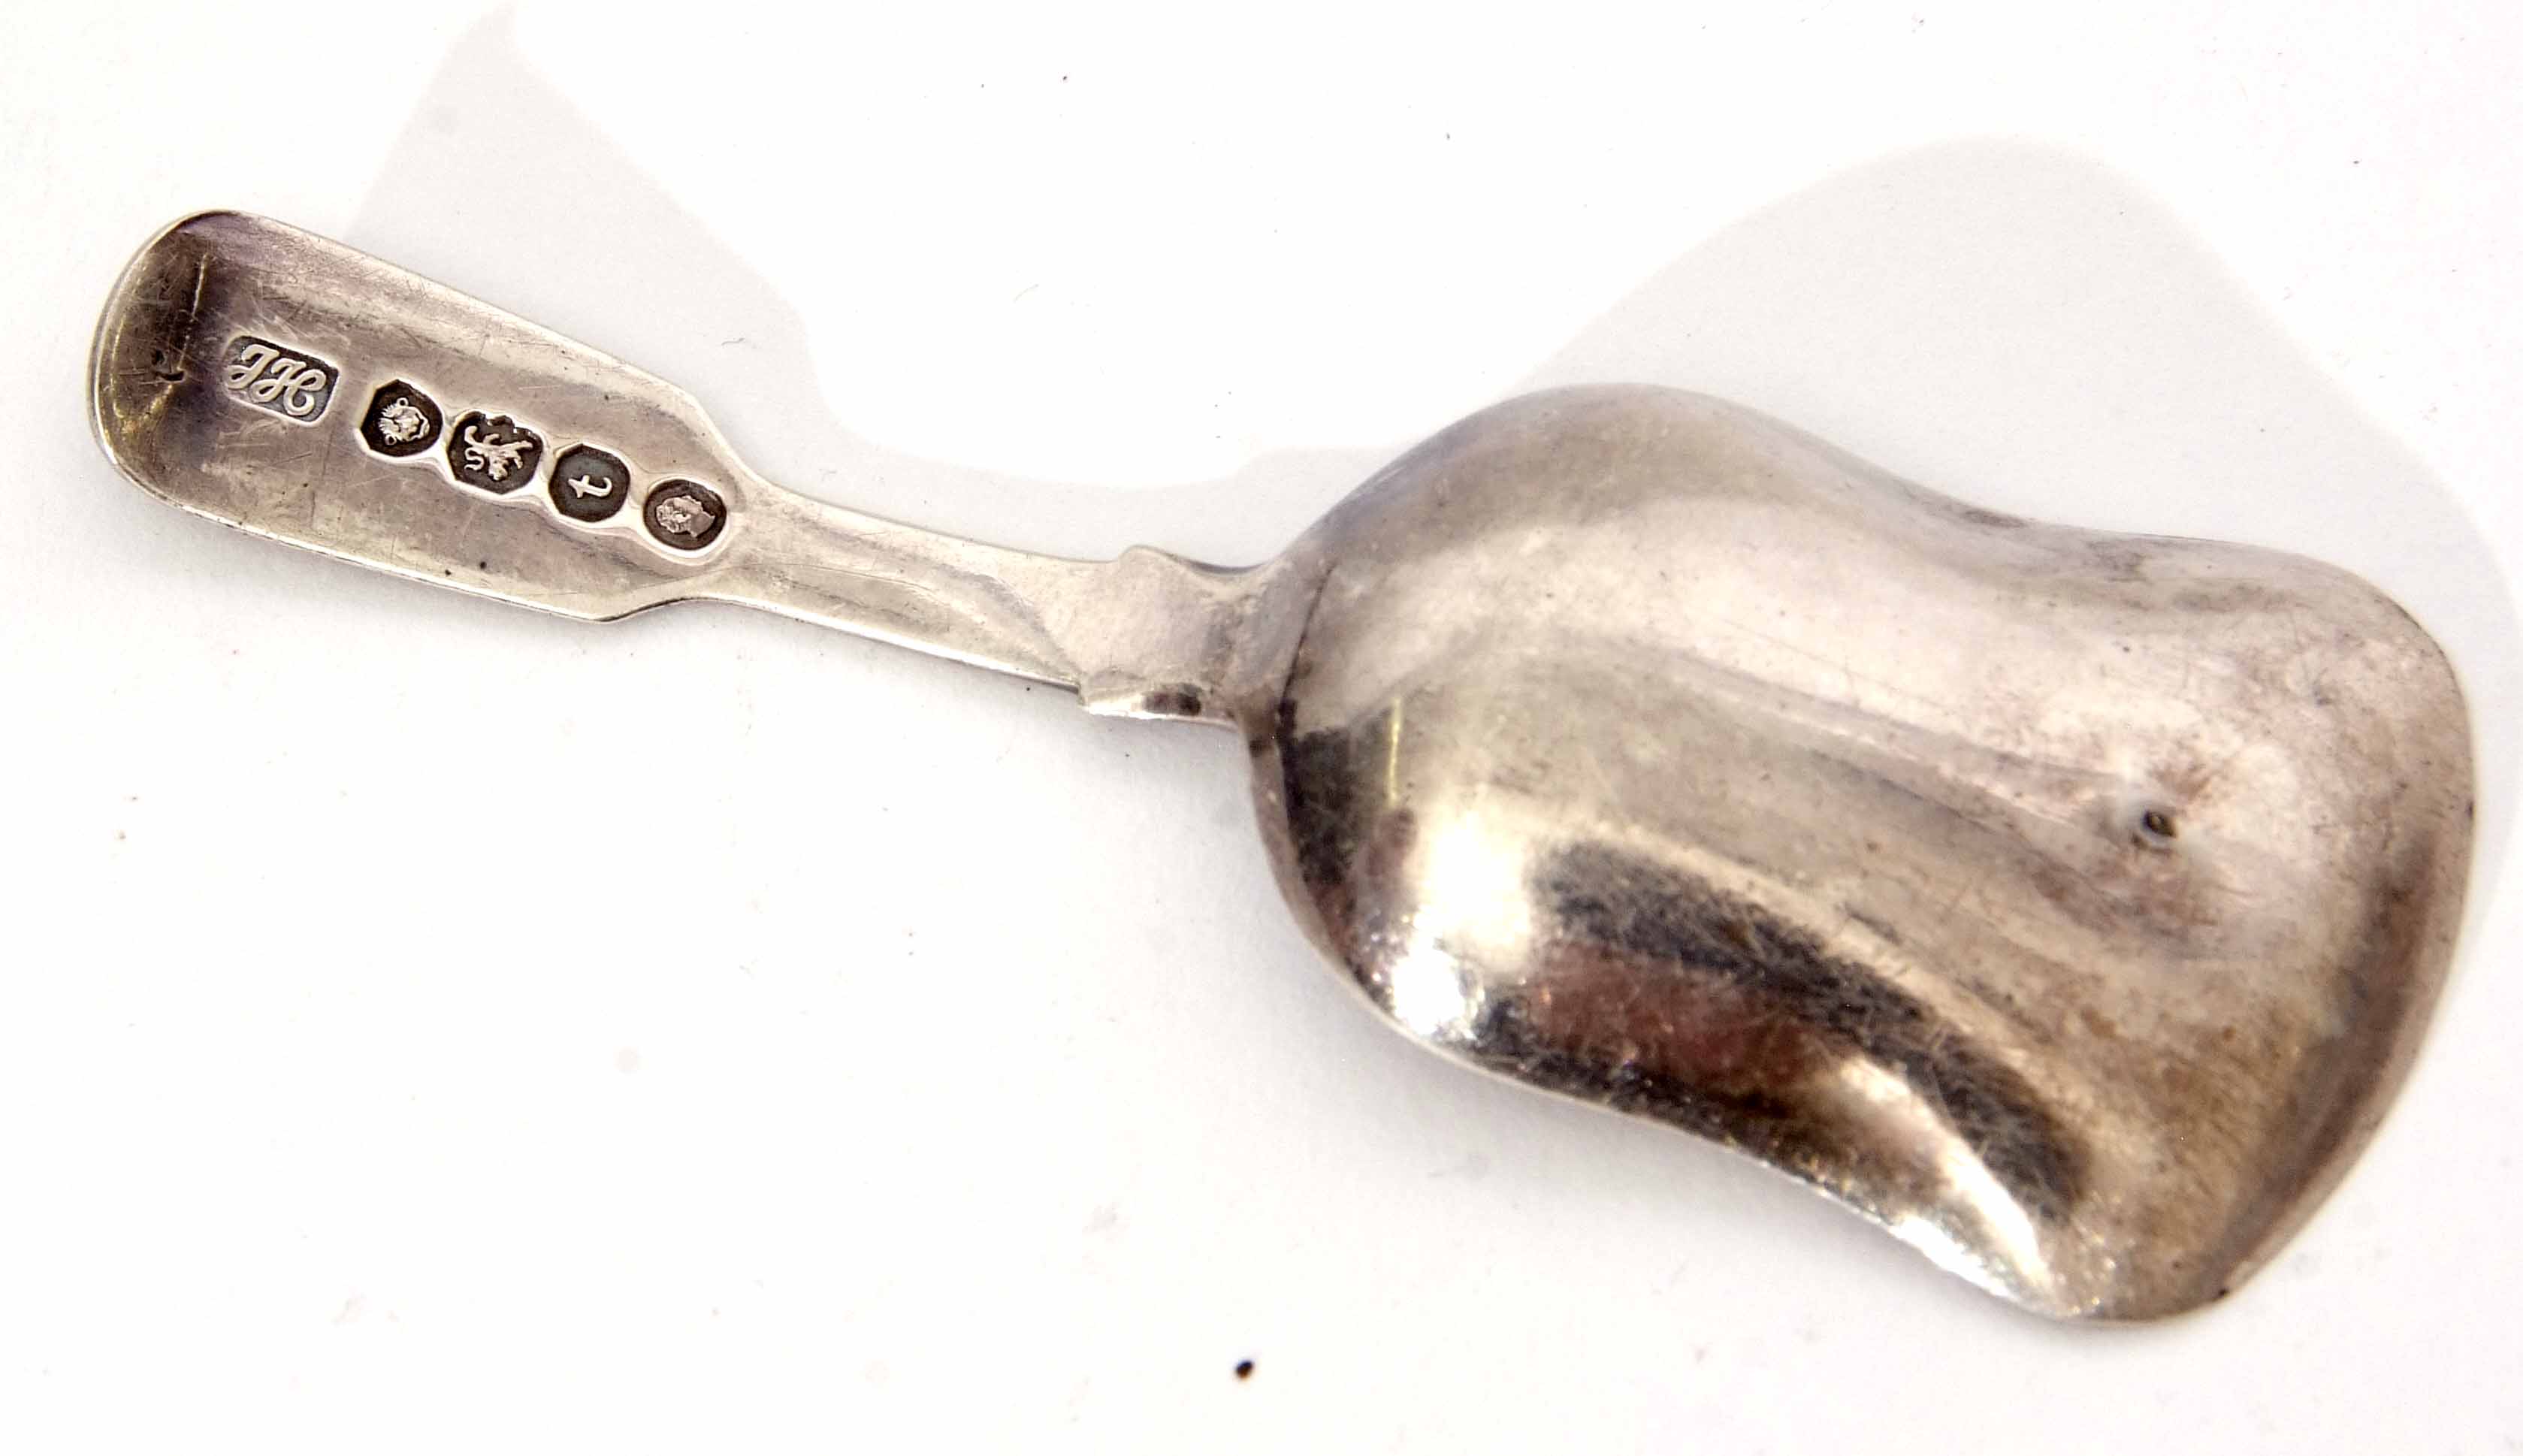 William IV Fiddle pattern toddy spoon with waisted bowl, length 9.3cm, weight approx 14gms, London - Image 2 of 2